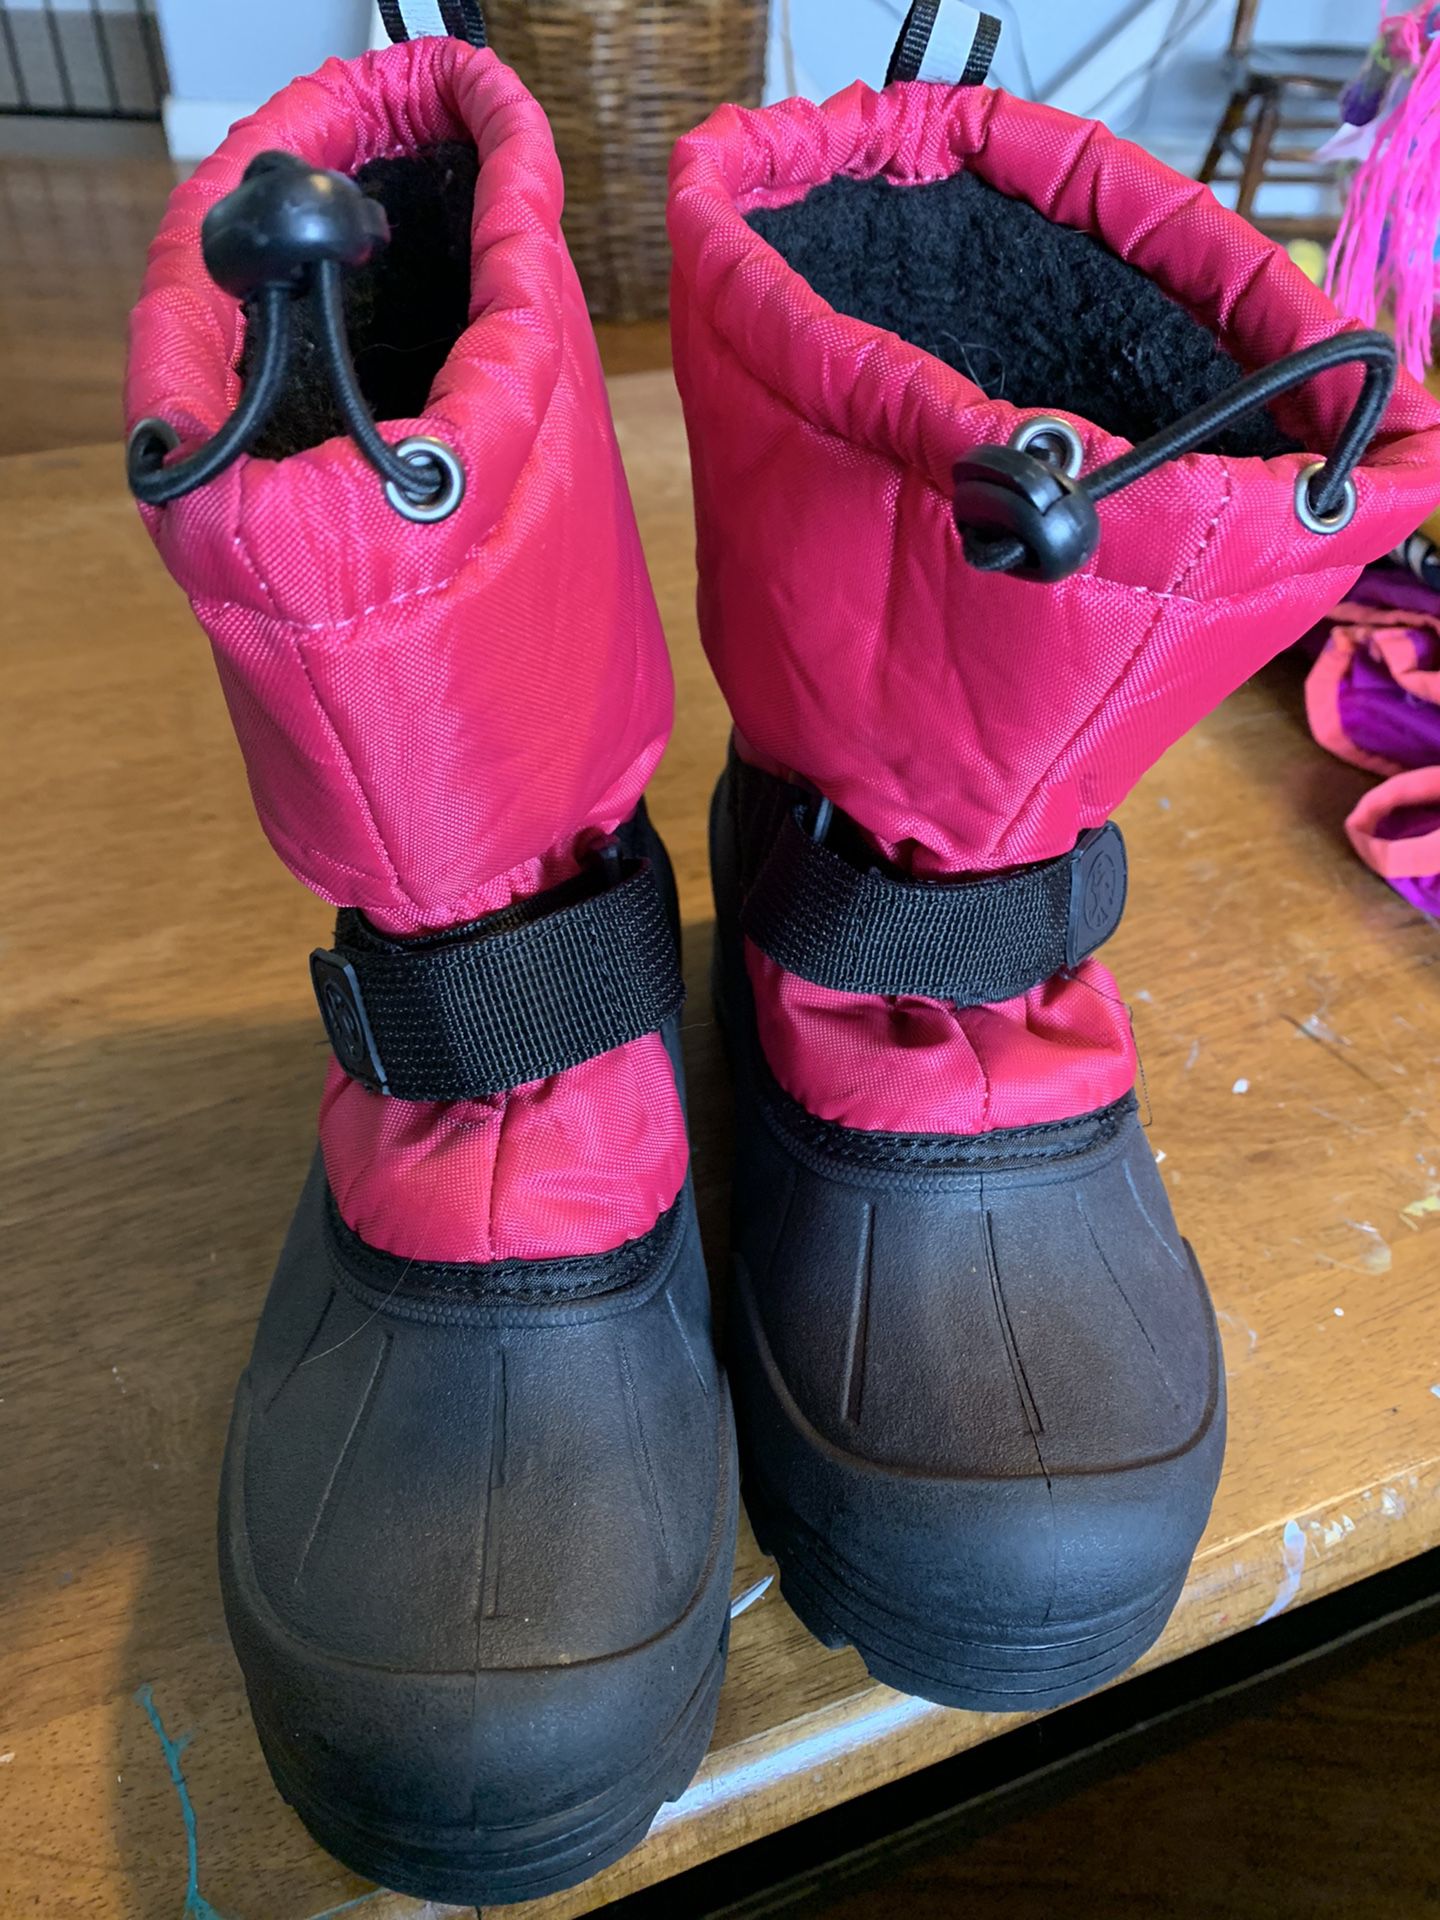 Girls snow boots size 2